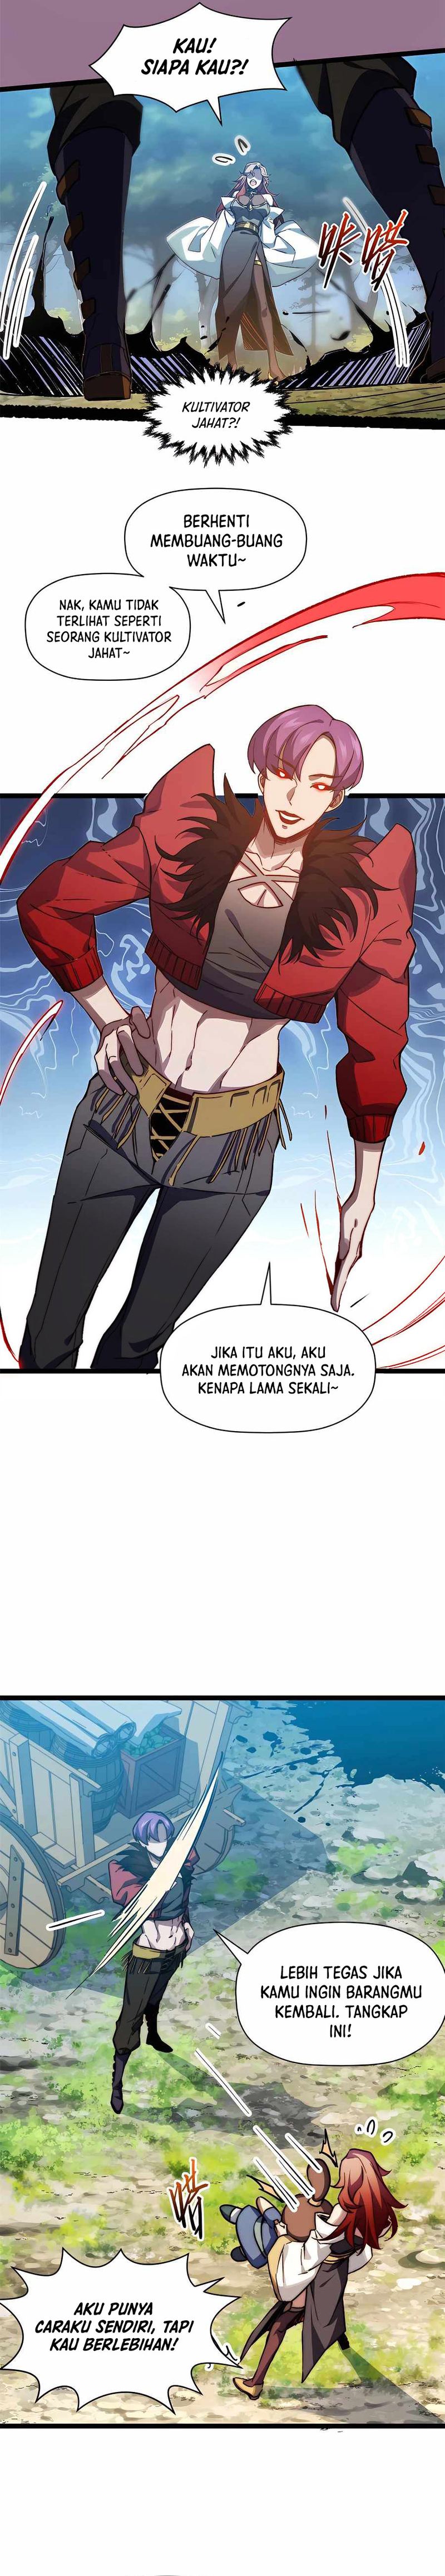 Dilarang COPAS - situs resmi www.mangacanblog.com - Komik top tier providence secretly cultivate for a thousand years 129 - chapter 129 130 Indonesia top tier providence secretly cultivate for a thousand years 129 - chapter 129 Terbaru 4|Baca Manga Komik Indonesia|Mangacan